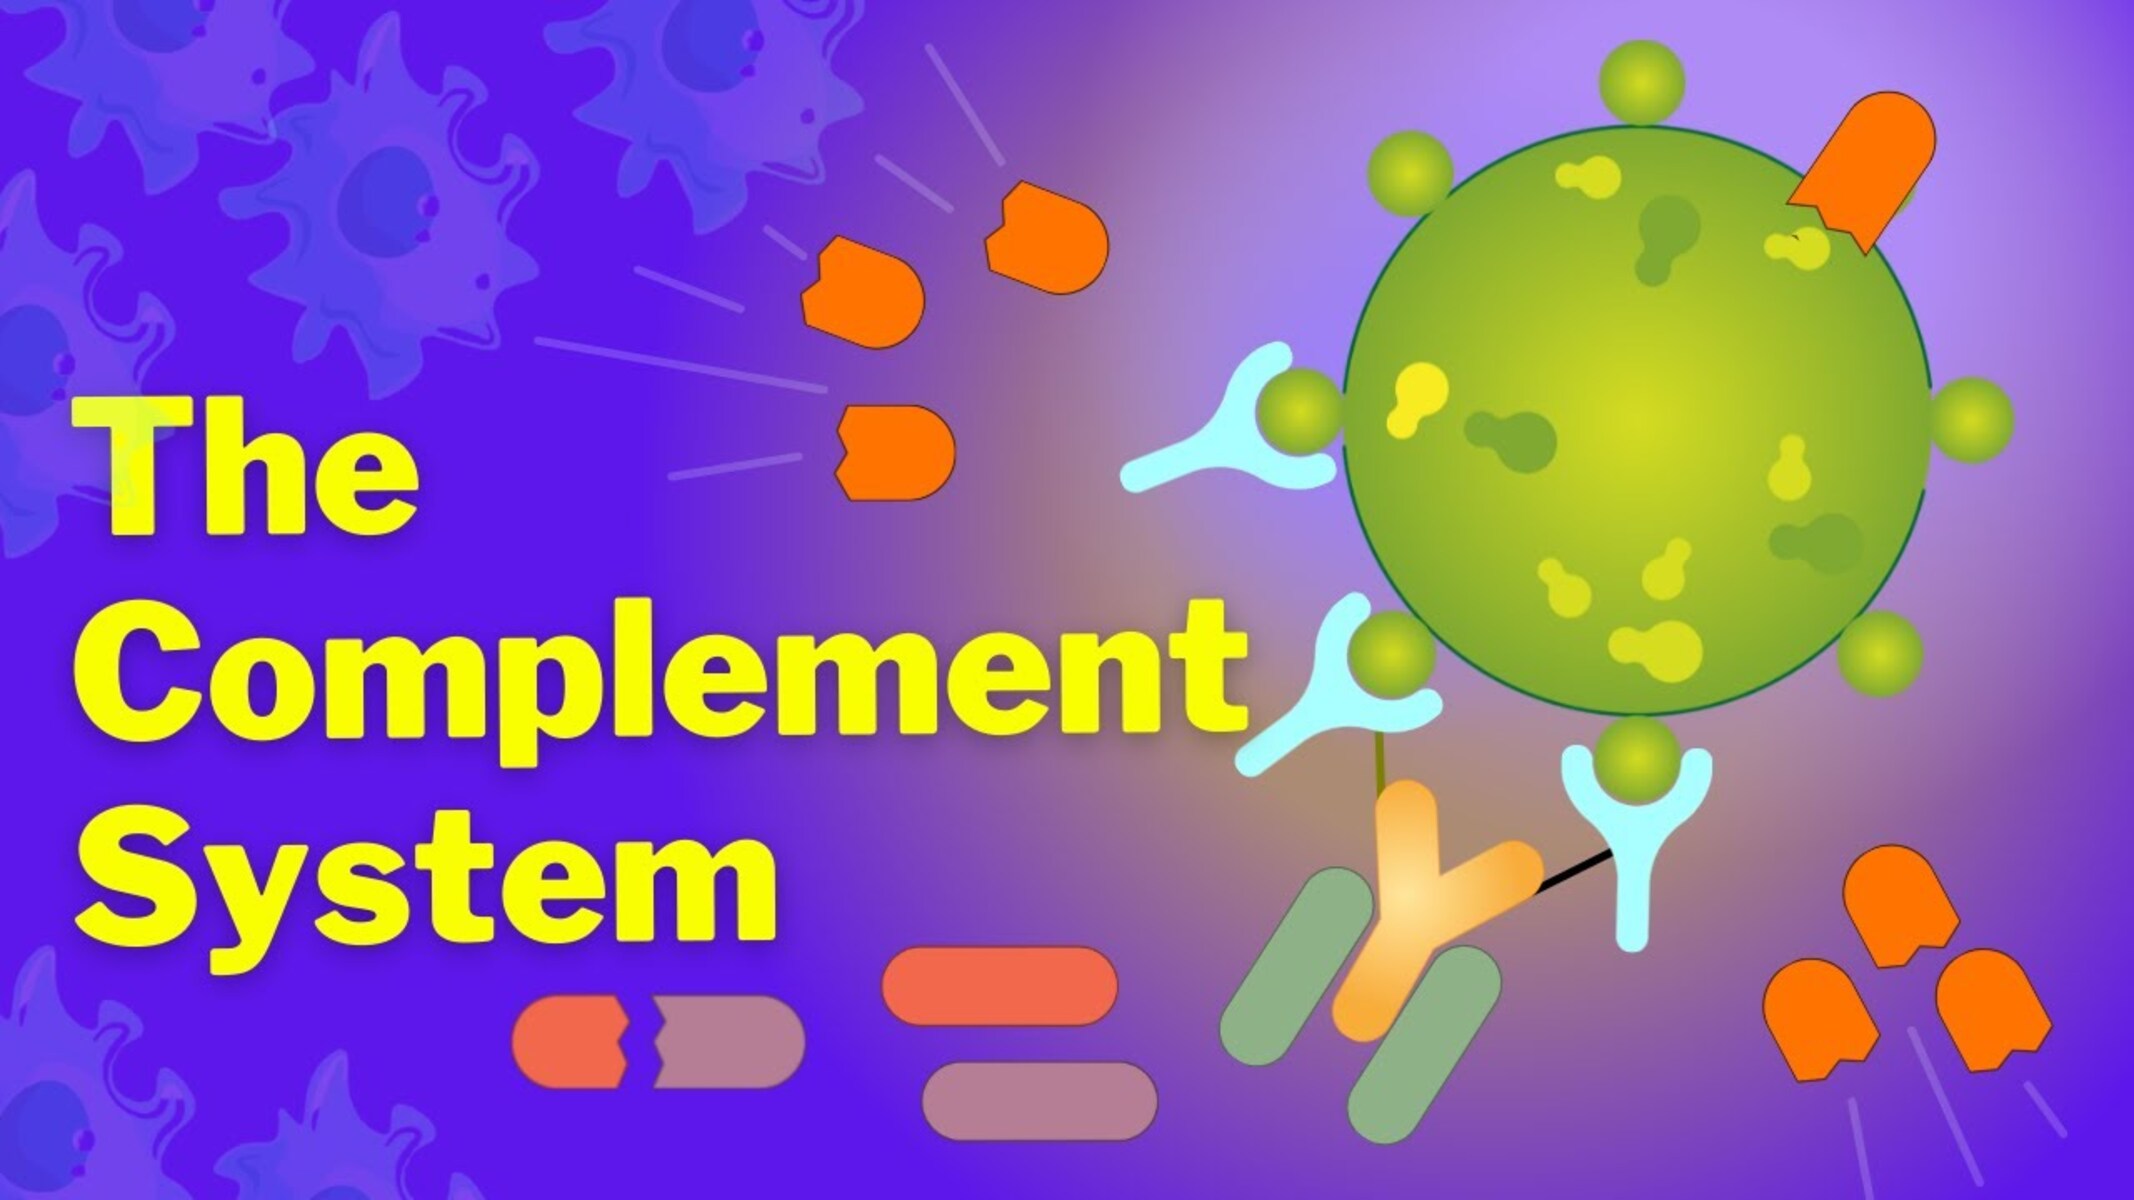 20 Extraordinary Facts About Complement System - Facts.net